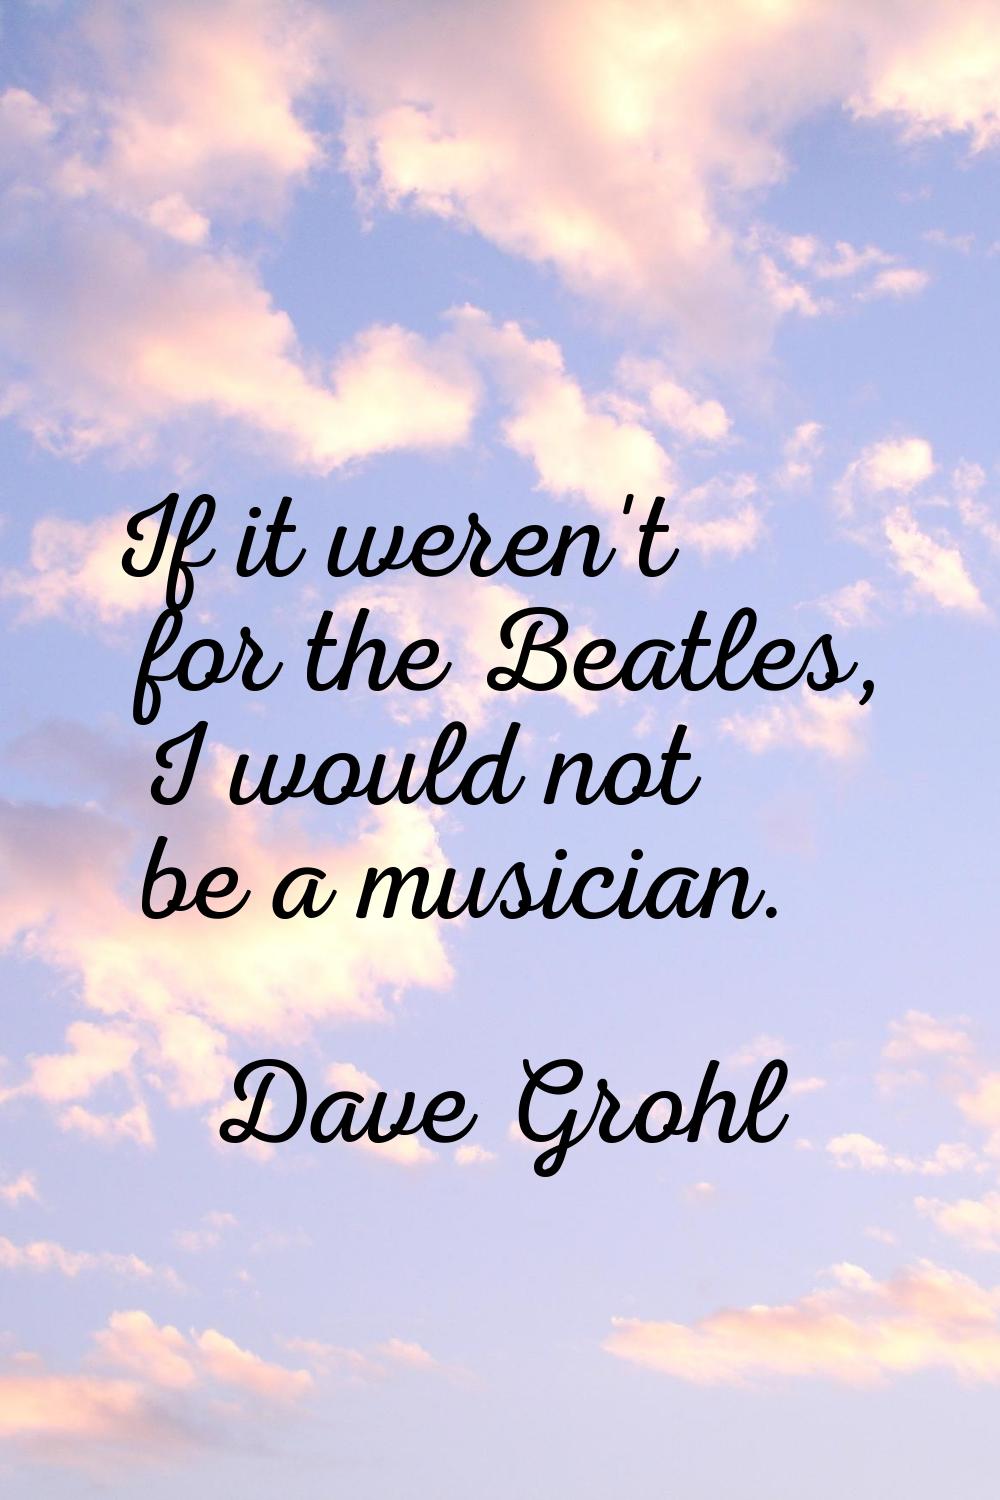 If it weren't for the Beatles, I would not be a musician.